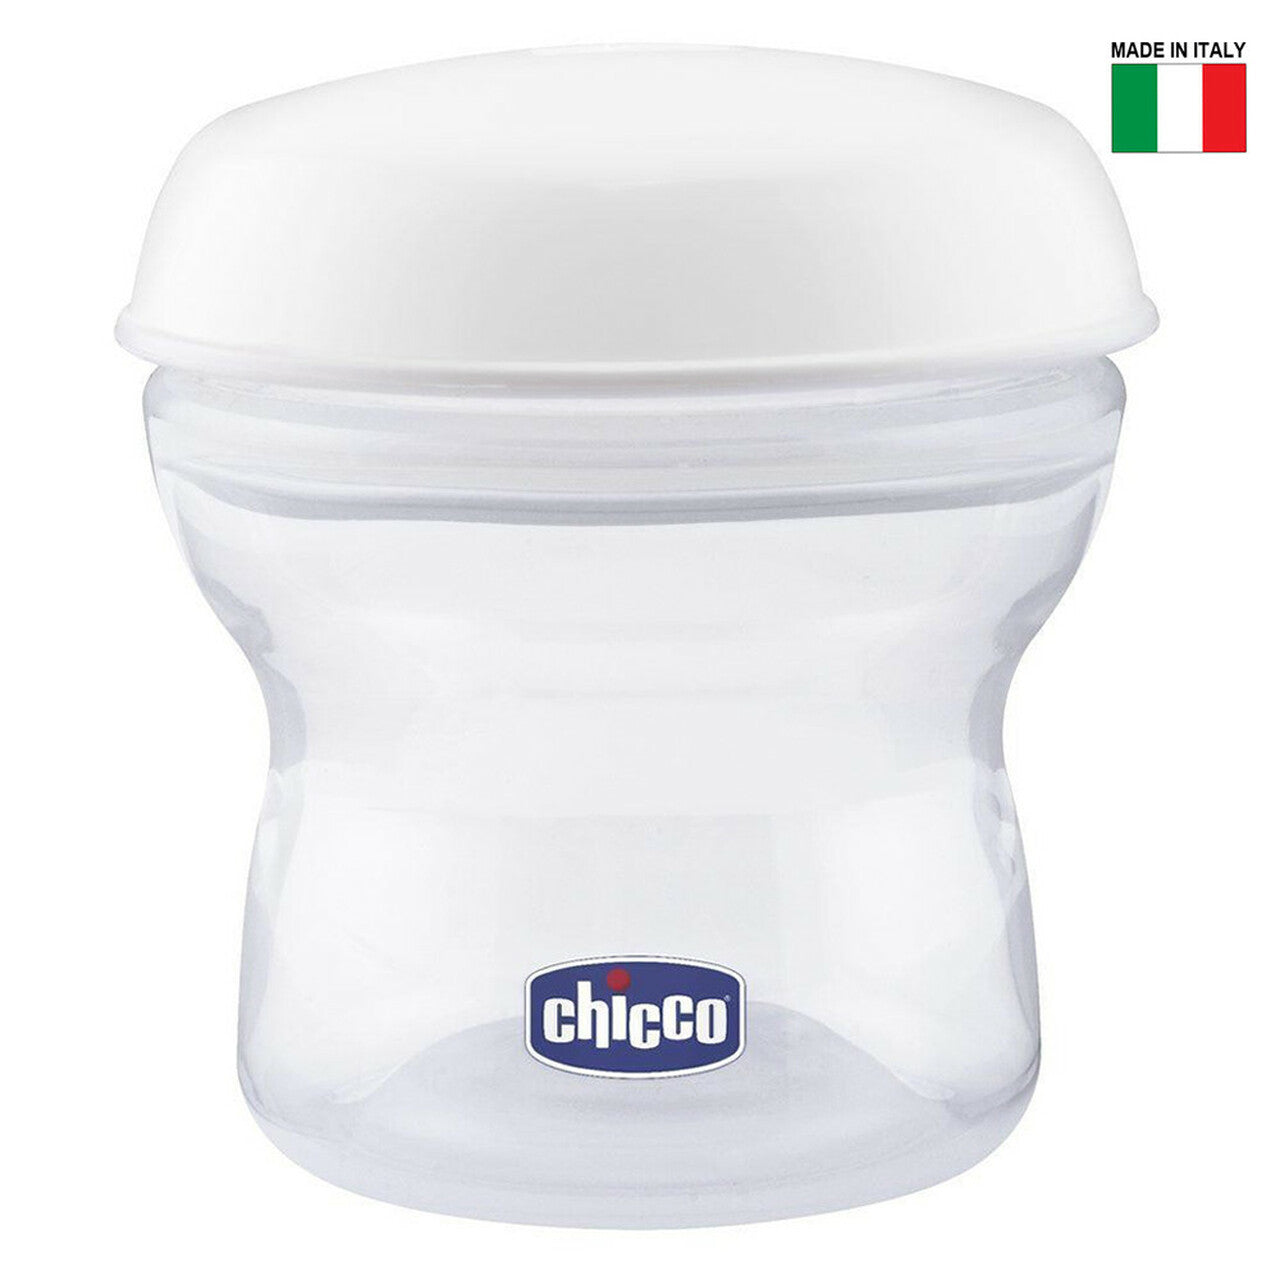 Chicco Multi Use Milk Containers 4 pk